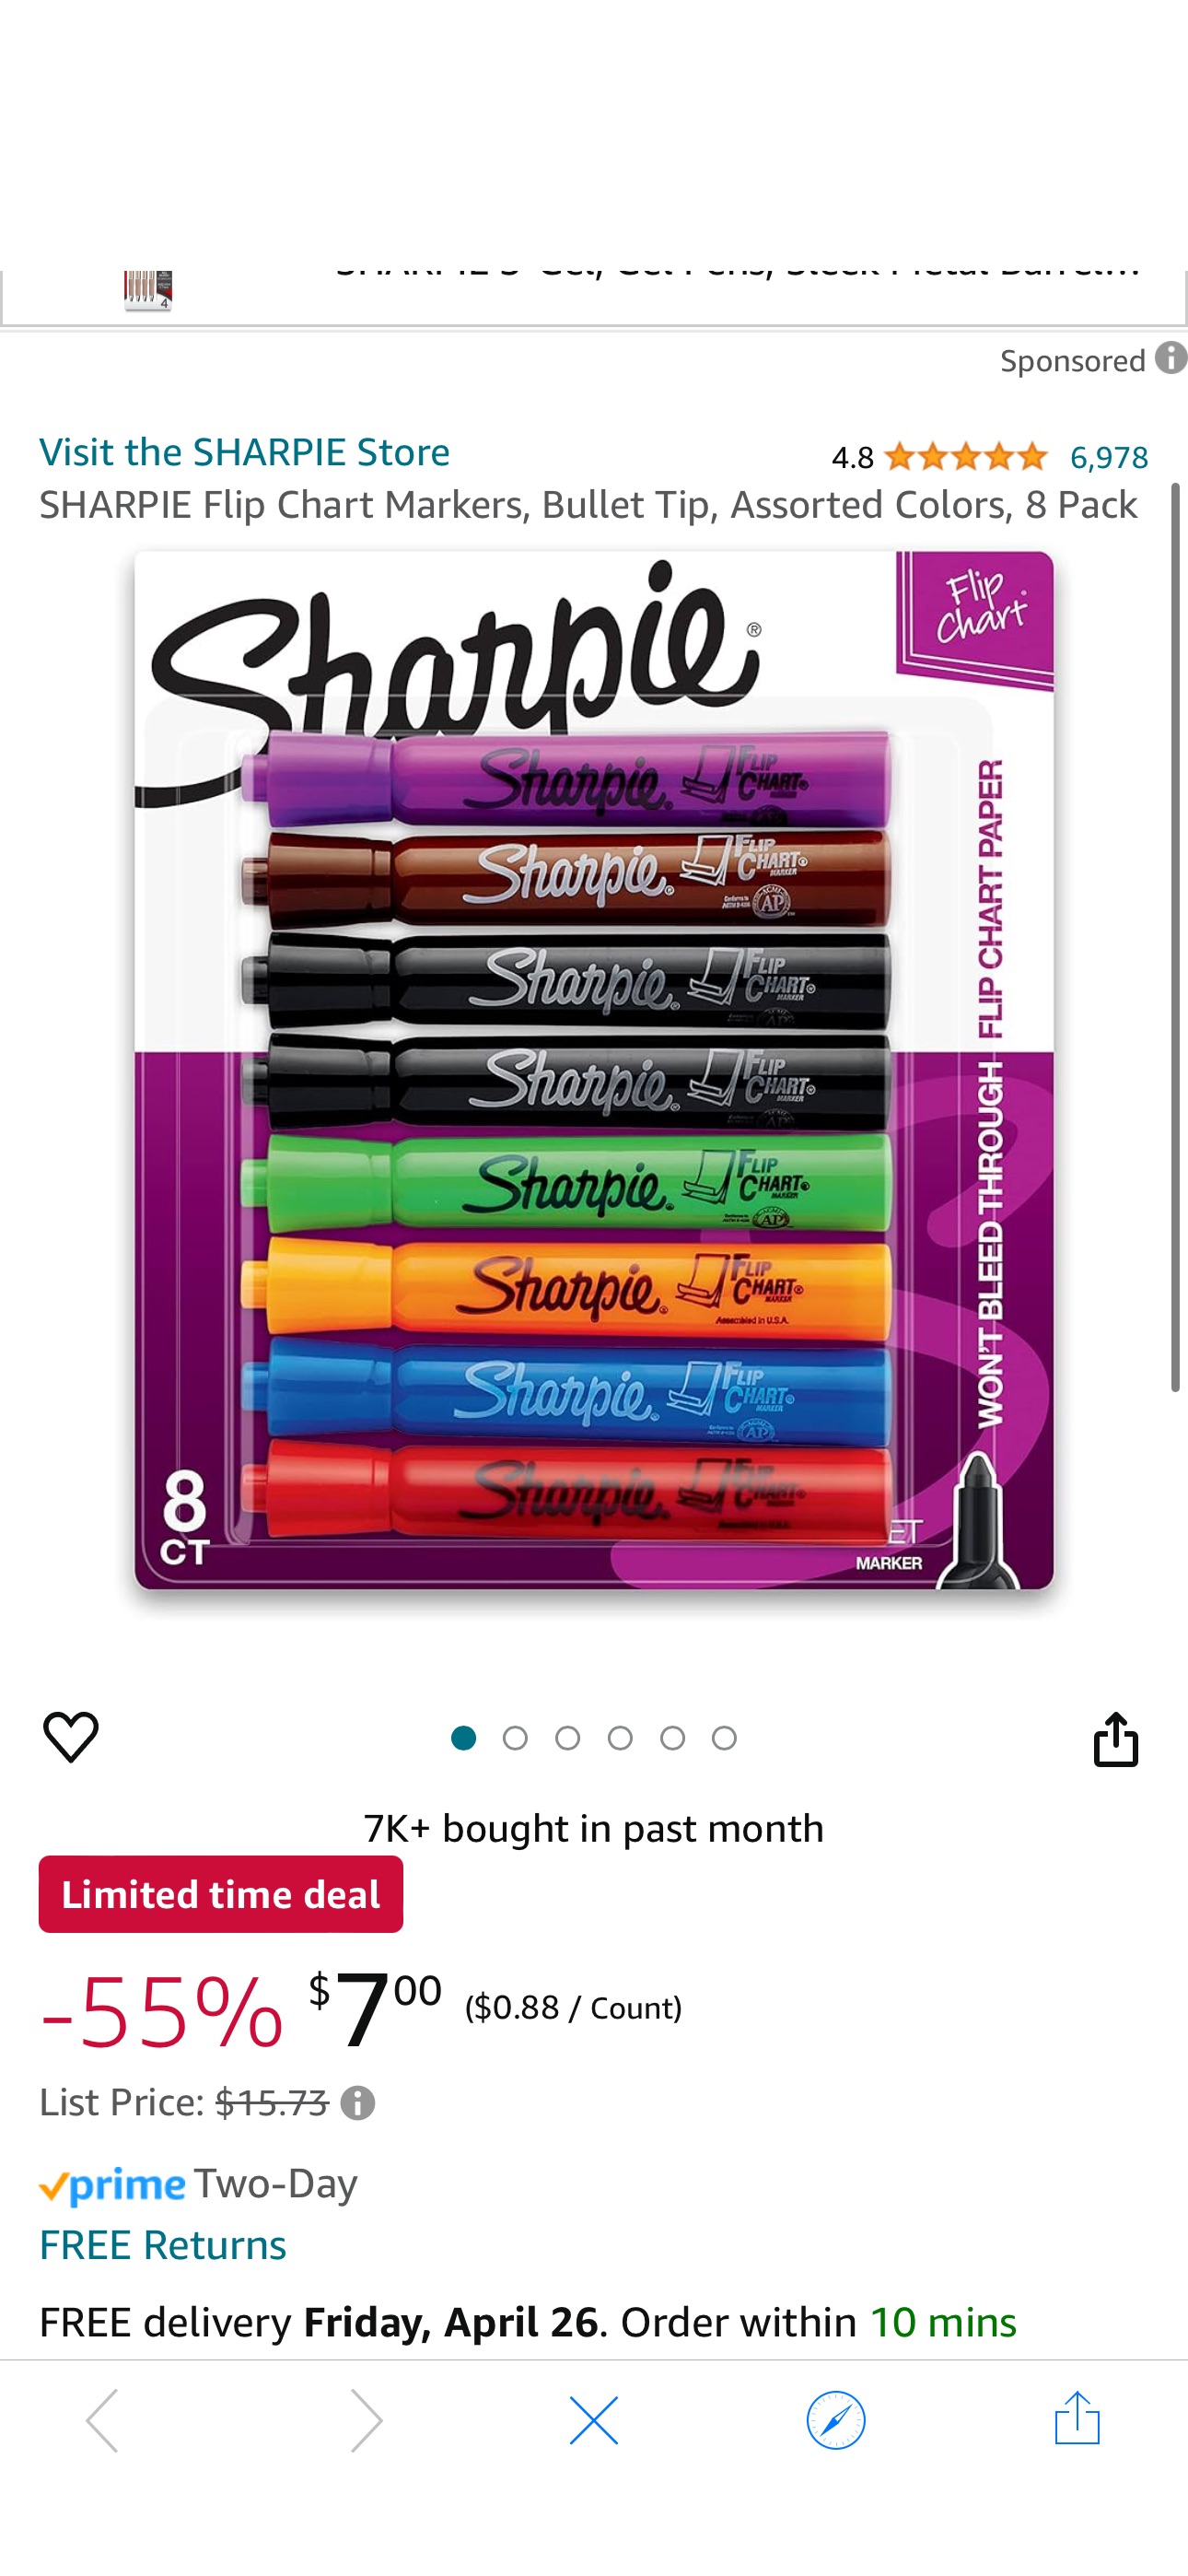 Amazon.com : SHARPIE Flip Chart Markers, Bullet Tip, Assorted Colors, 8 Pack : Permanent Markers : Office Products